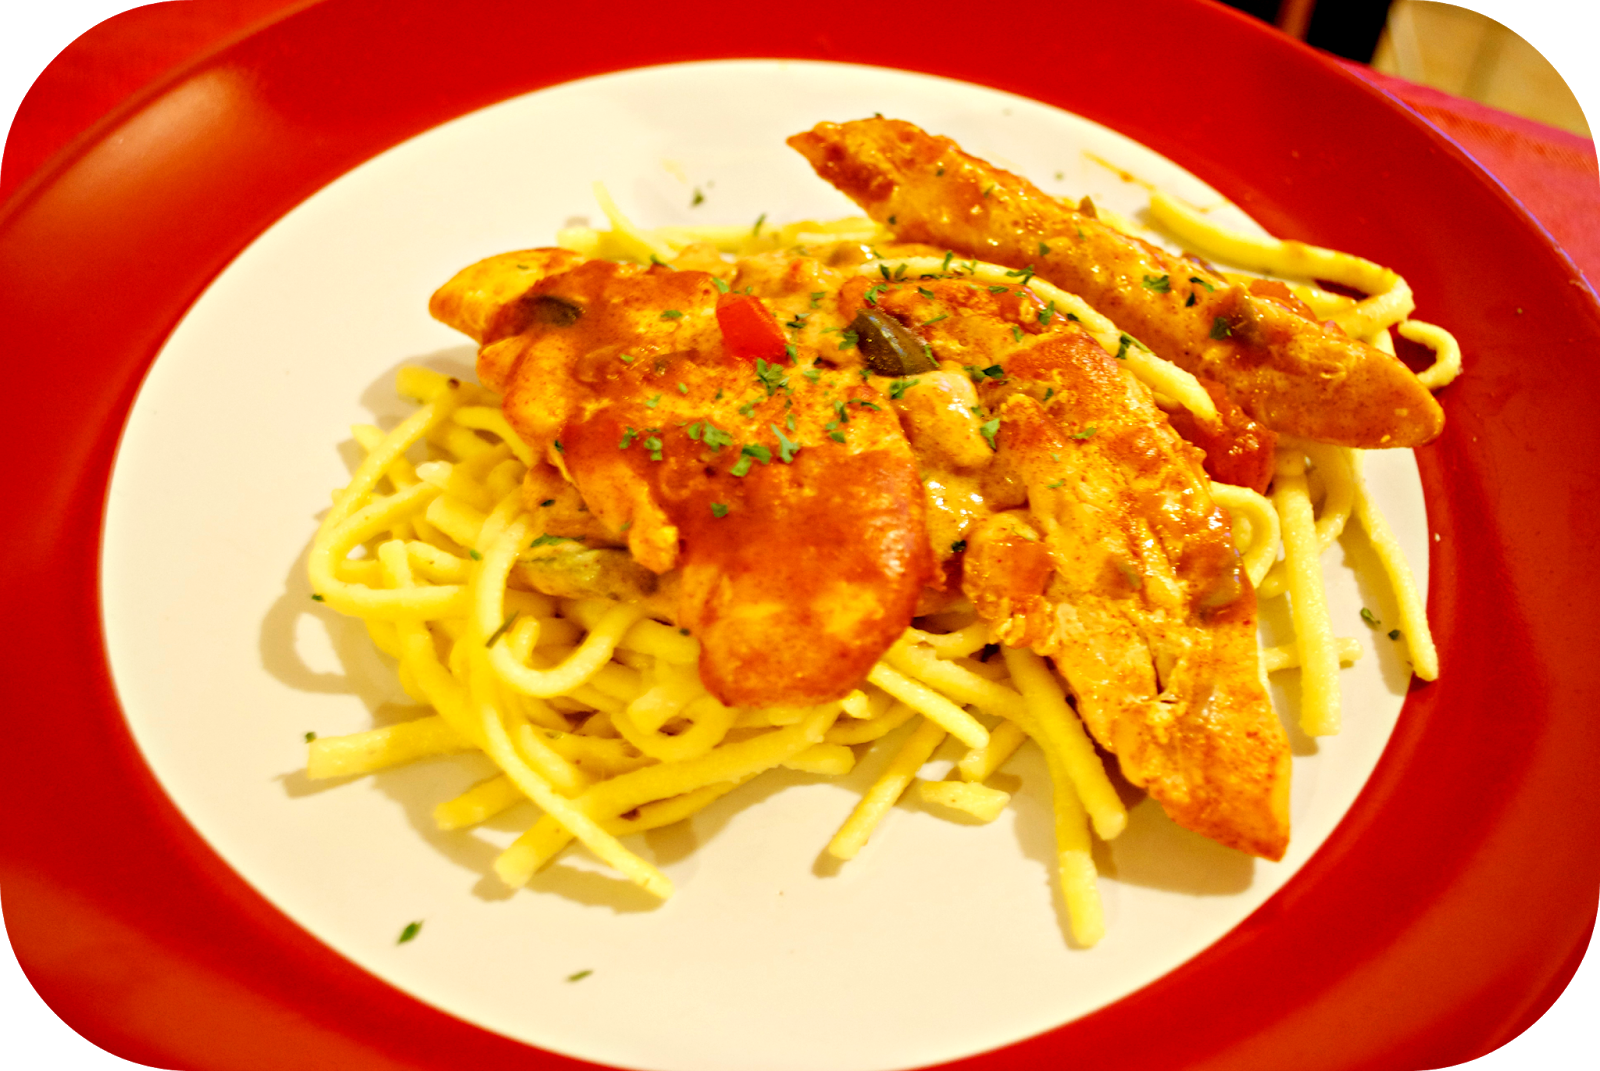 My Joy of Cooking: Chicken Paprikash with Spaetzle